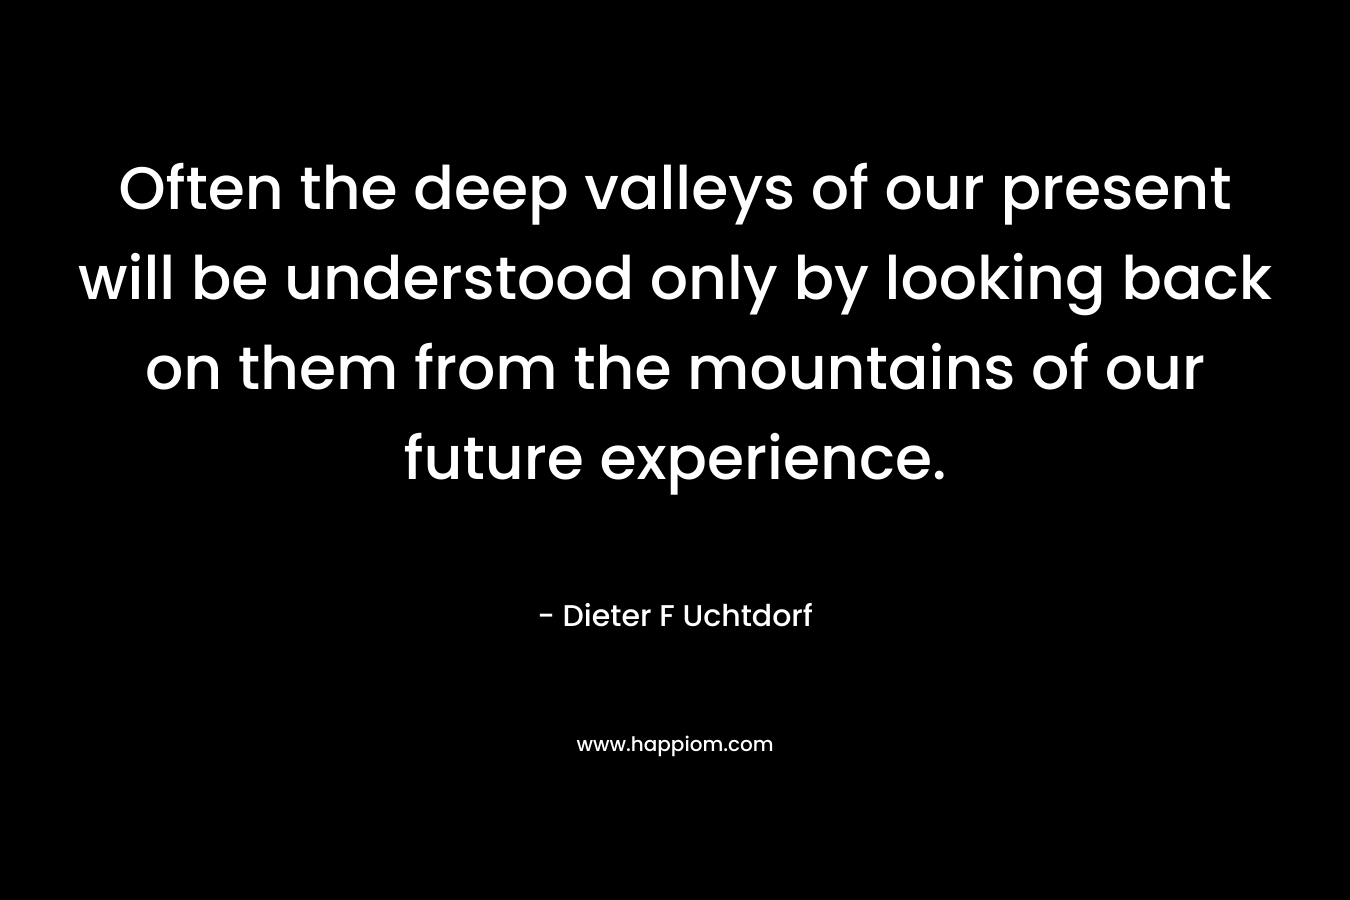 Often the deep valleys of our present will be understood only by looking back on them from the mountains of our future experience. – Dieter F Uchtdorf